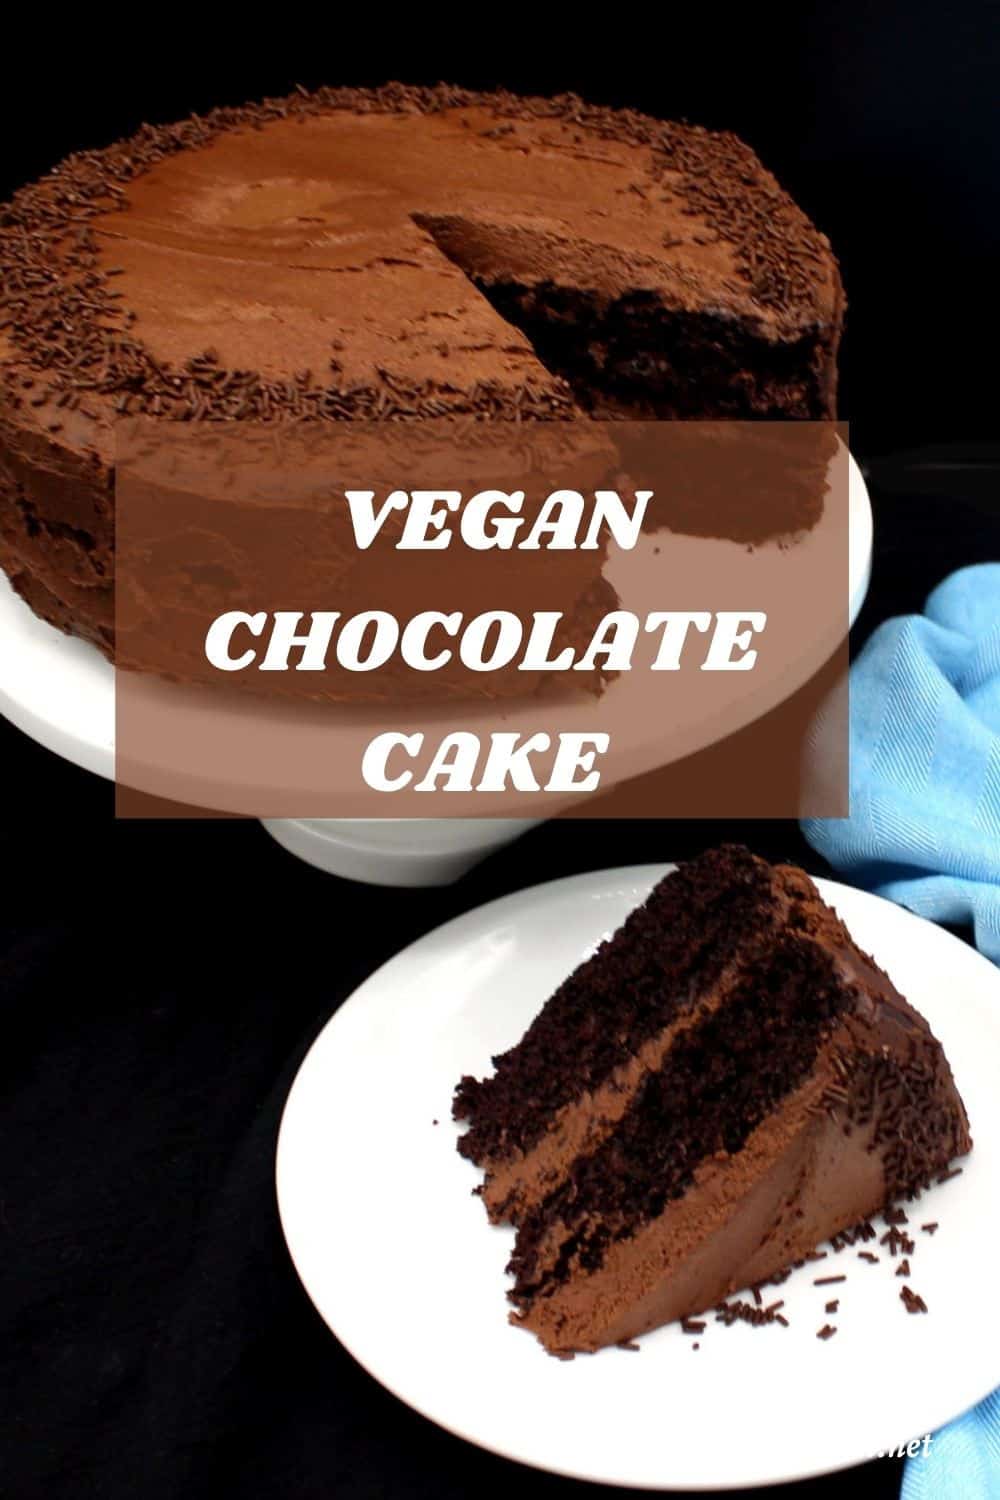 Image of a slice of cake with whole cake in background with text inlay that says "vegan chocolate cake".